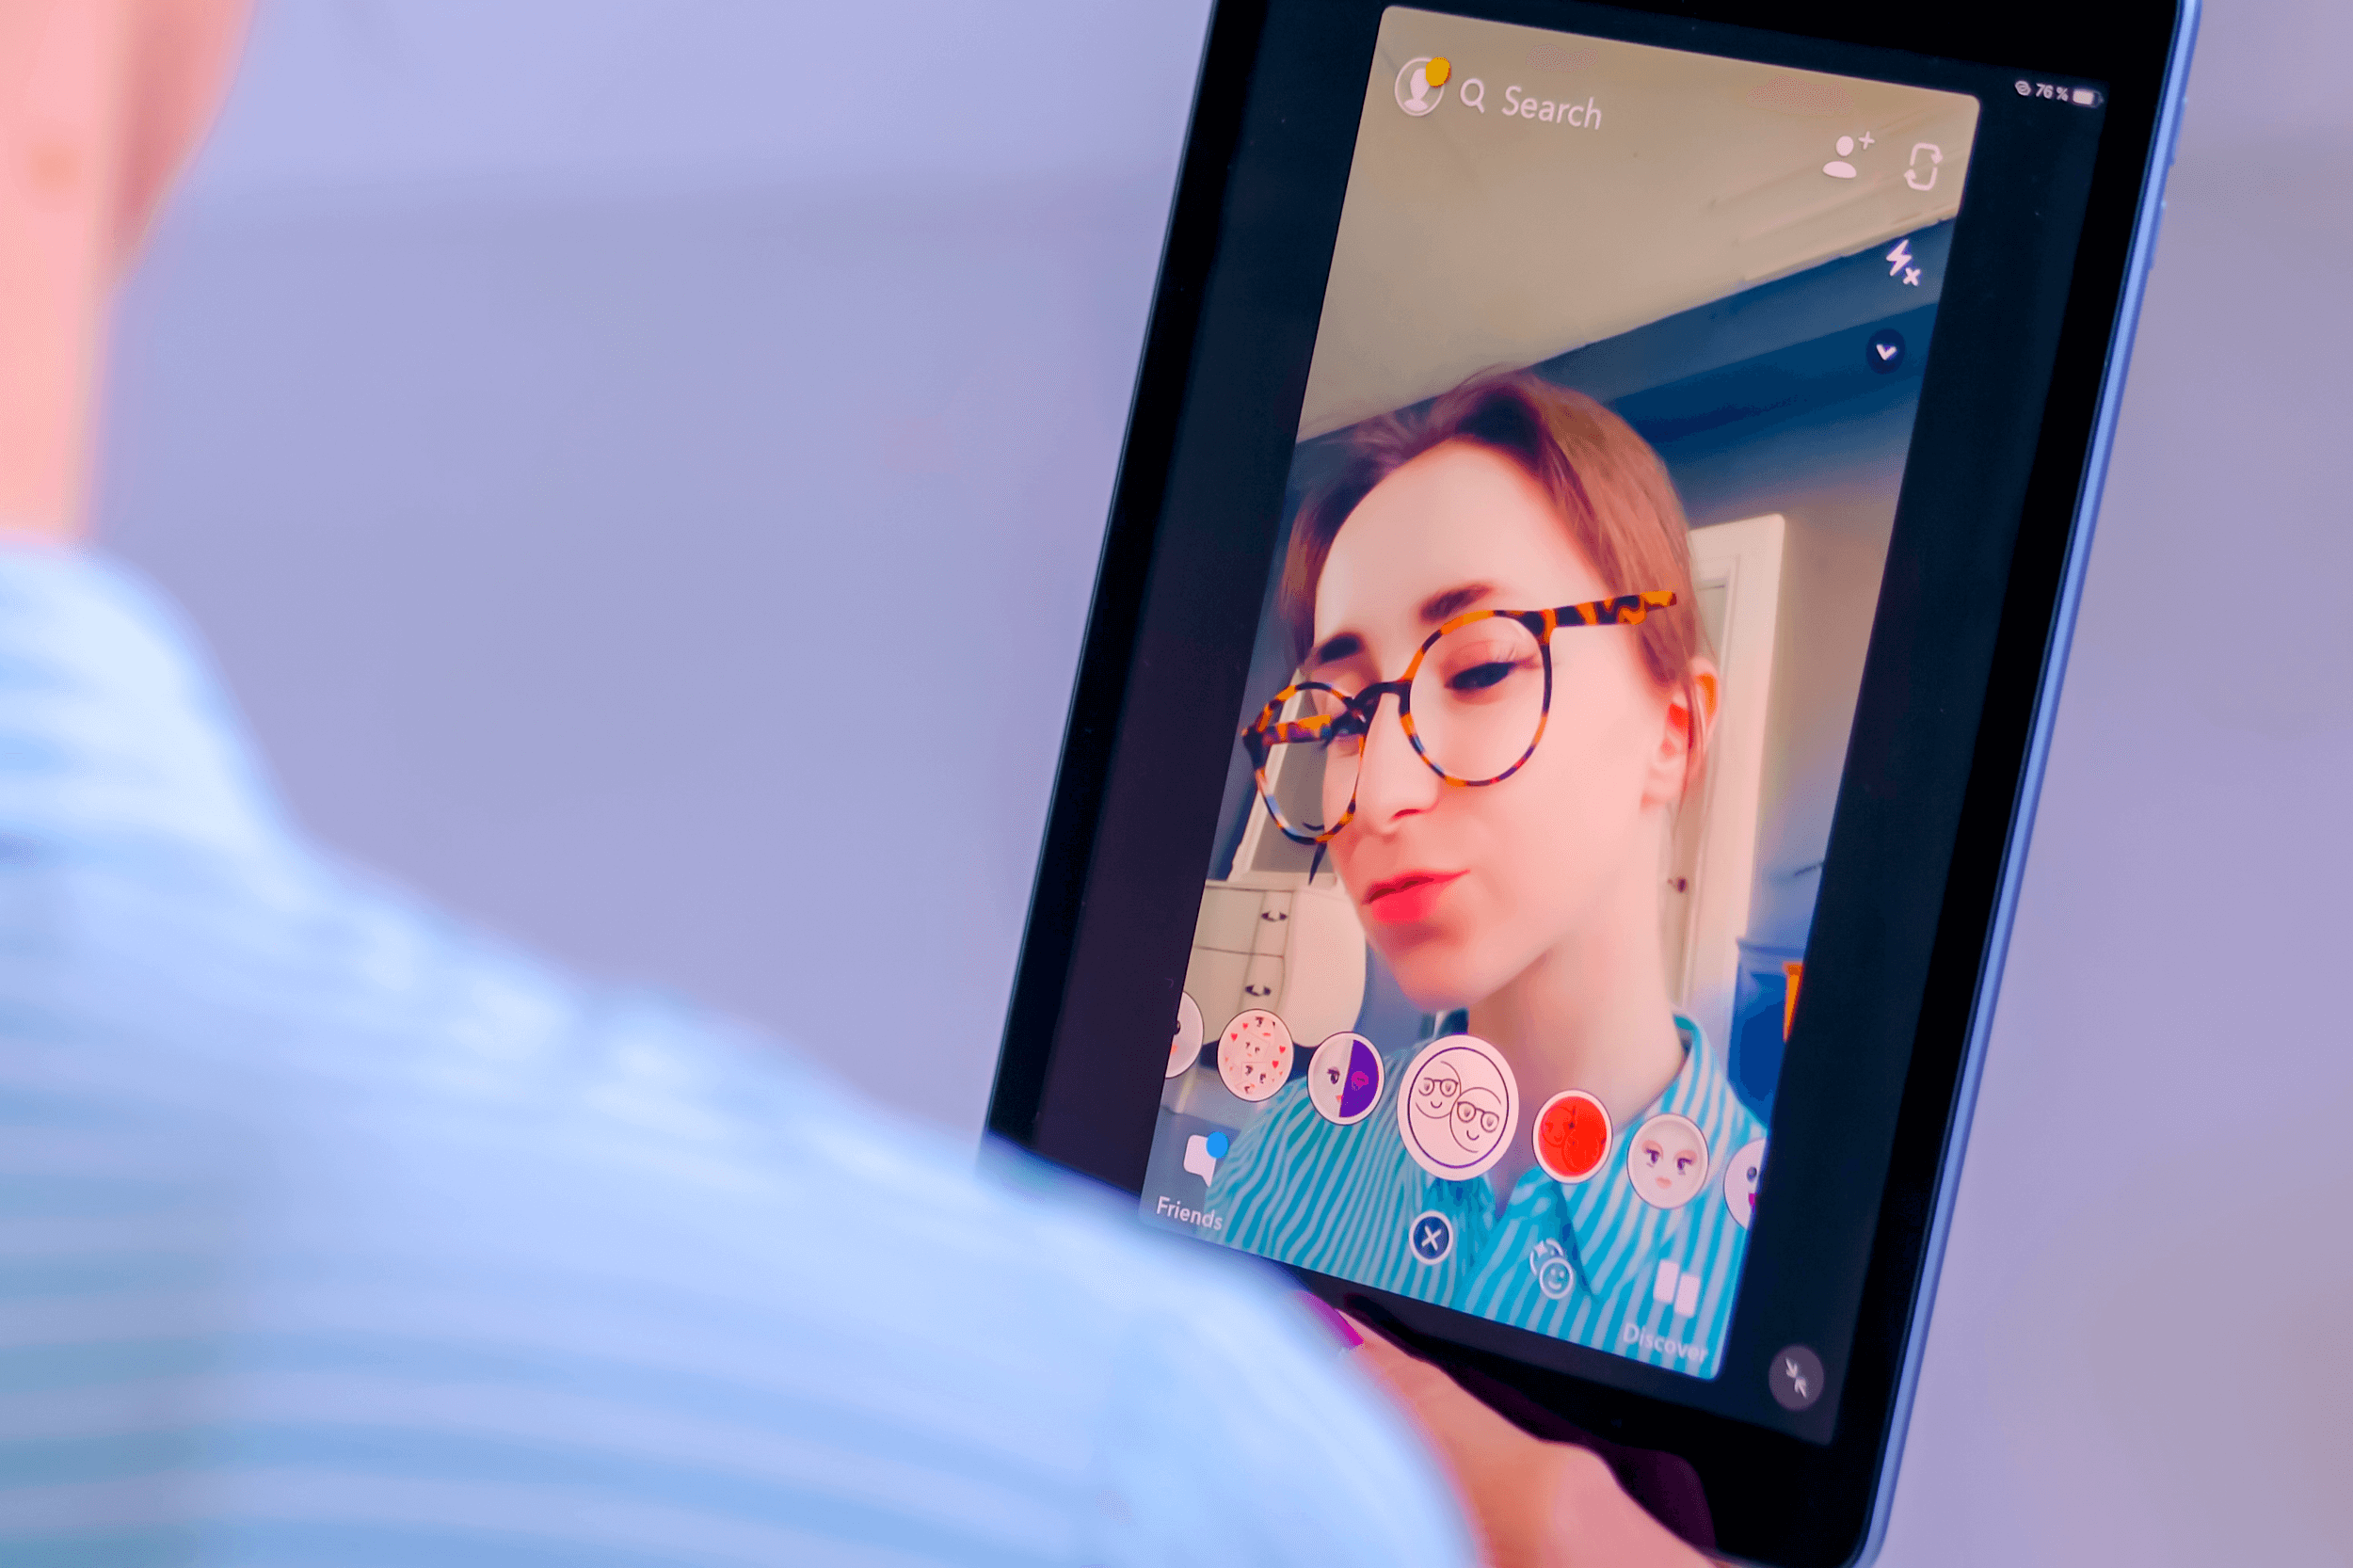 Snapchat multimedia messager with 3d face mask filter on tablet in woman hands at home. Face detection technology, AR, social media, selfie, entertainment concept